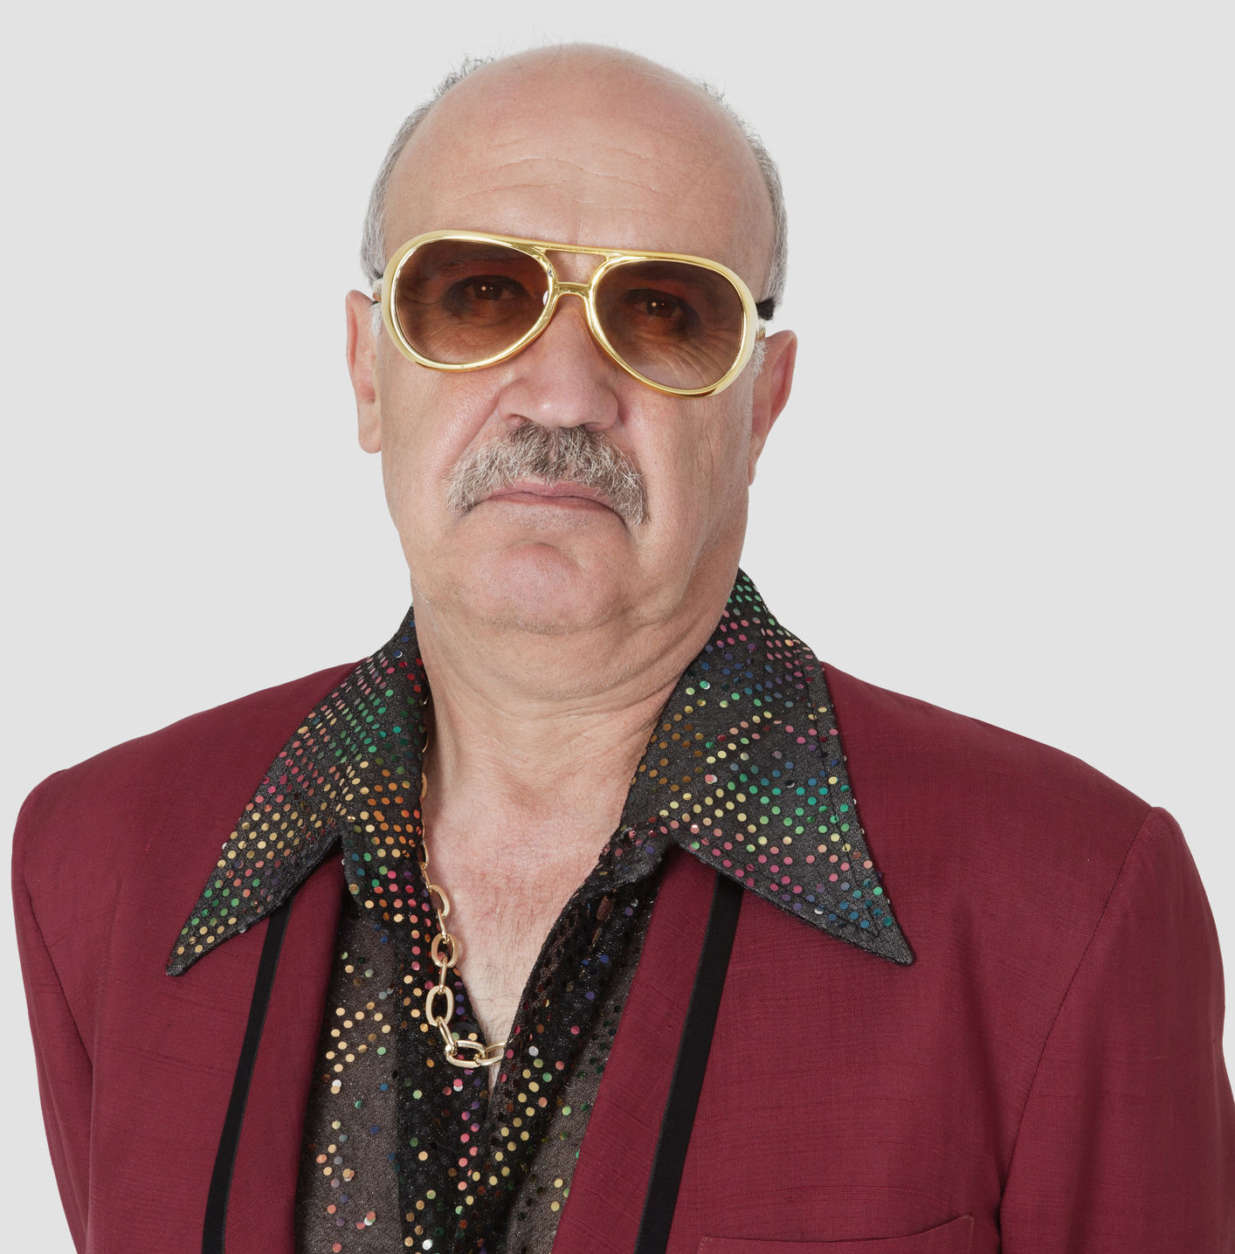 Portrait of unhappy senior man wearing sunglasses against gray background